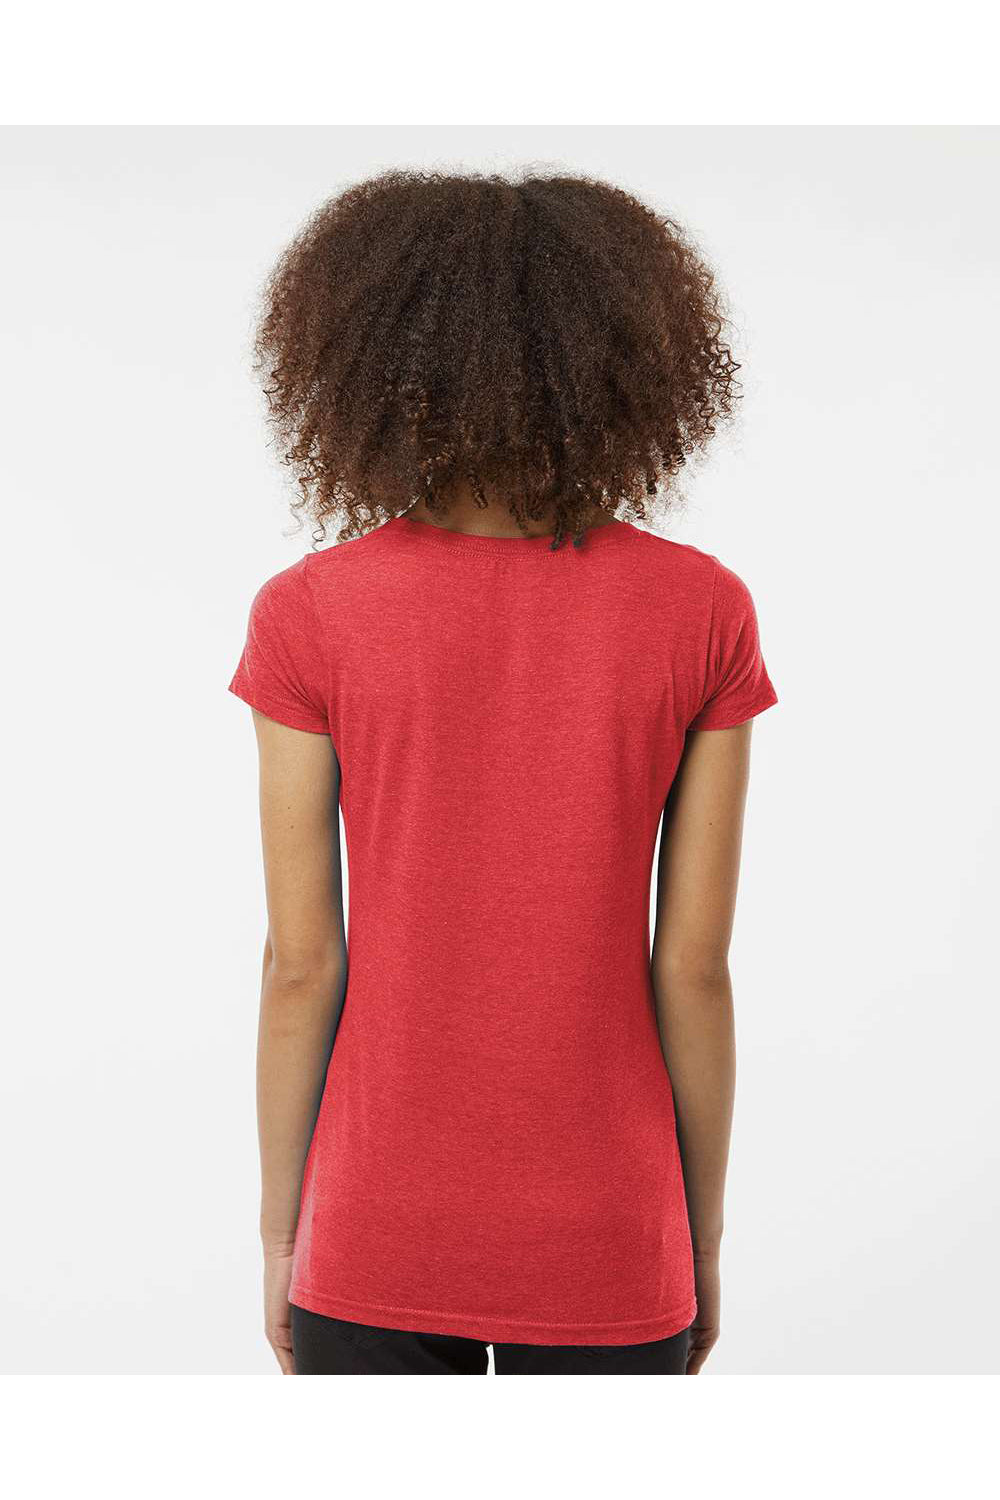 Tultex 243 Womens Poly-Rich Short Sleeve Scoop Neck T-Shirt Heather Red Model Back